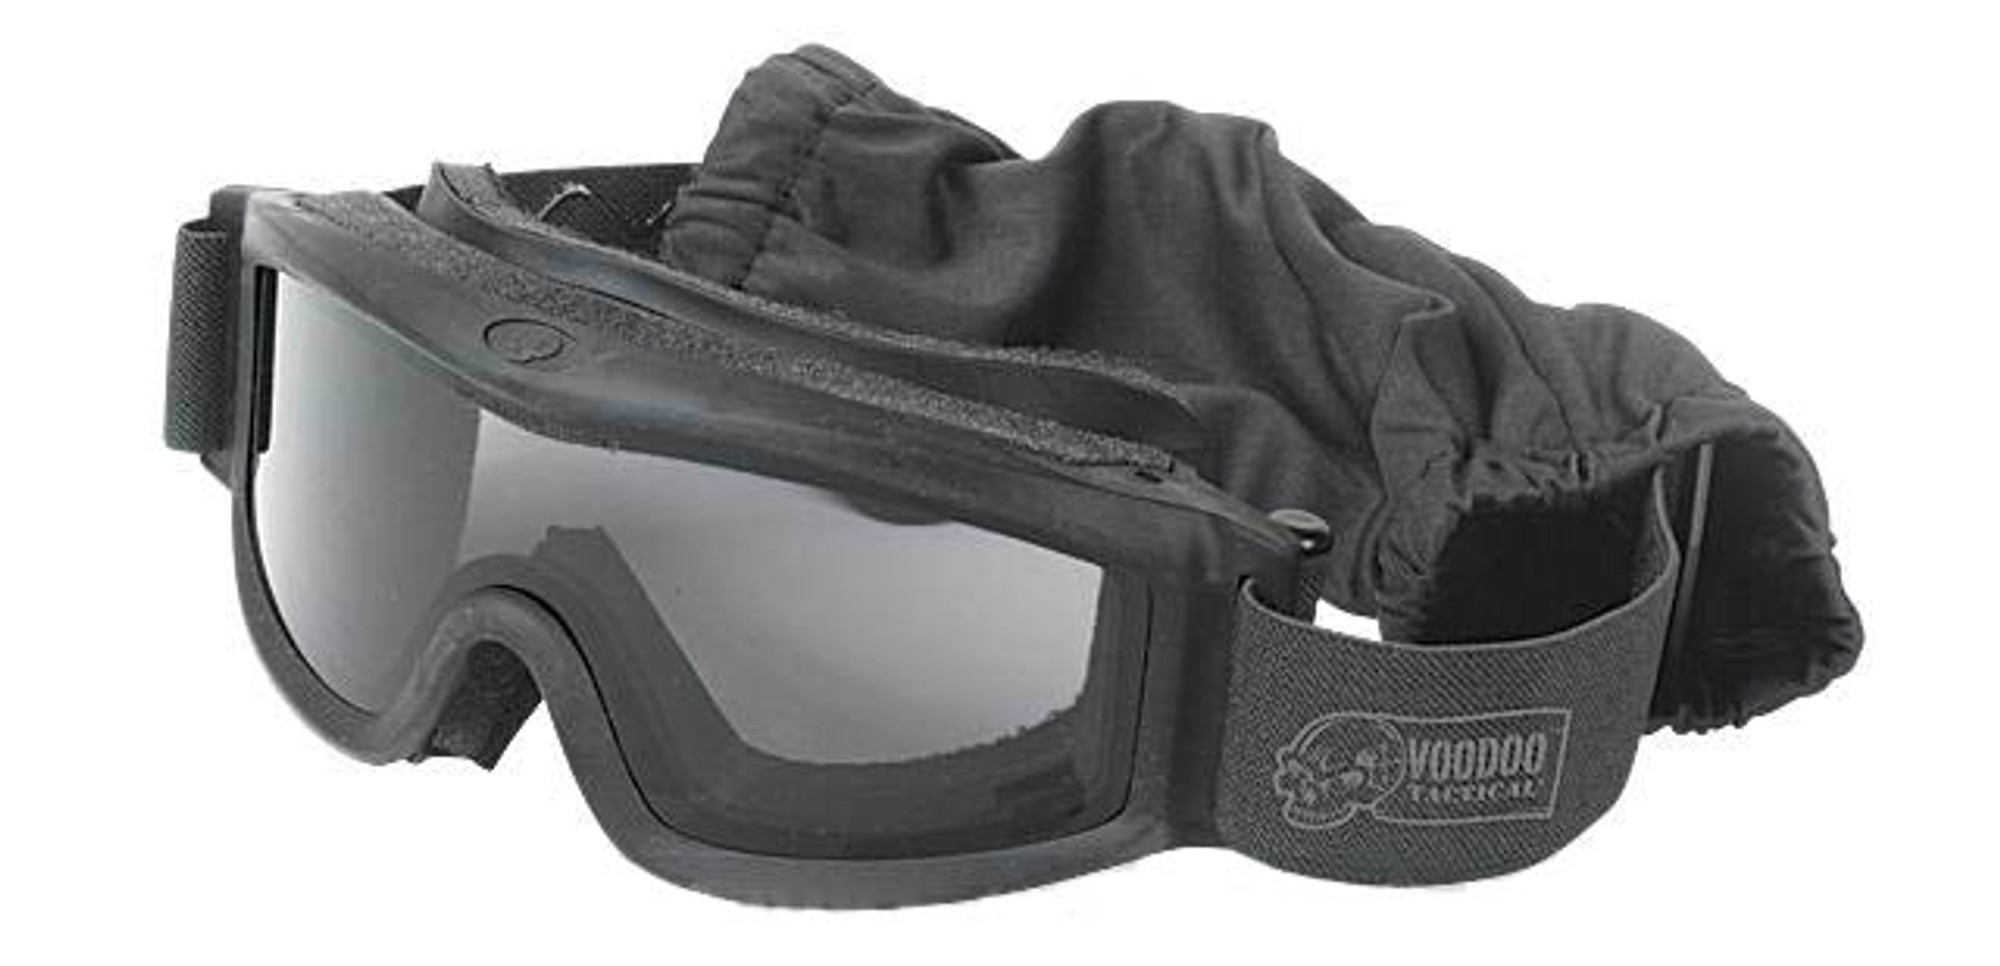 Voodoo Tactical Full Seal Tactical Goggle Kit with Three Lenses - Black